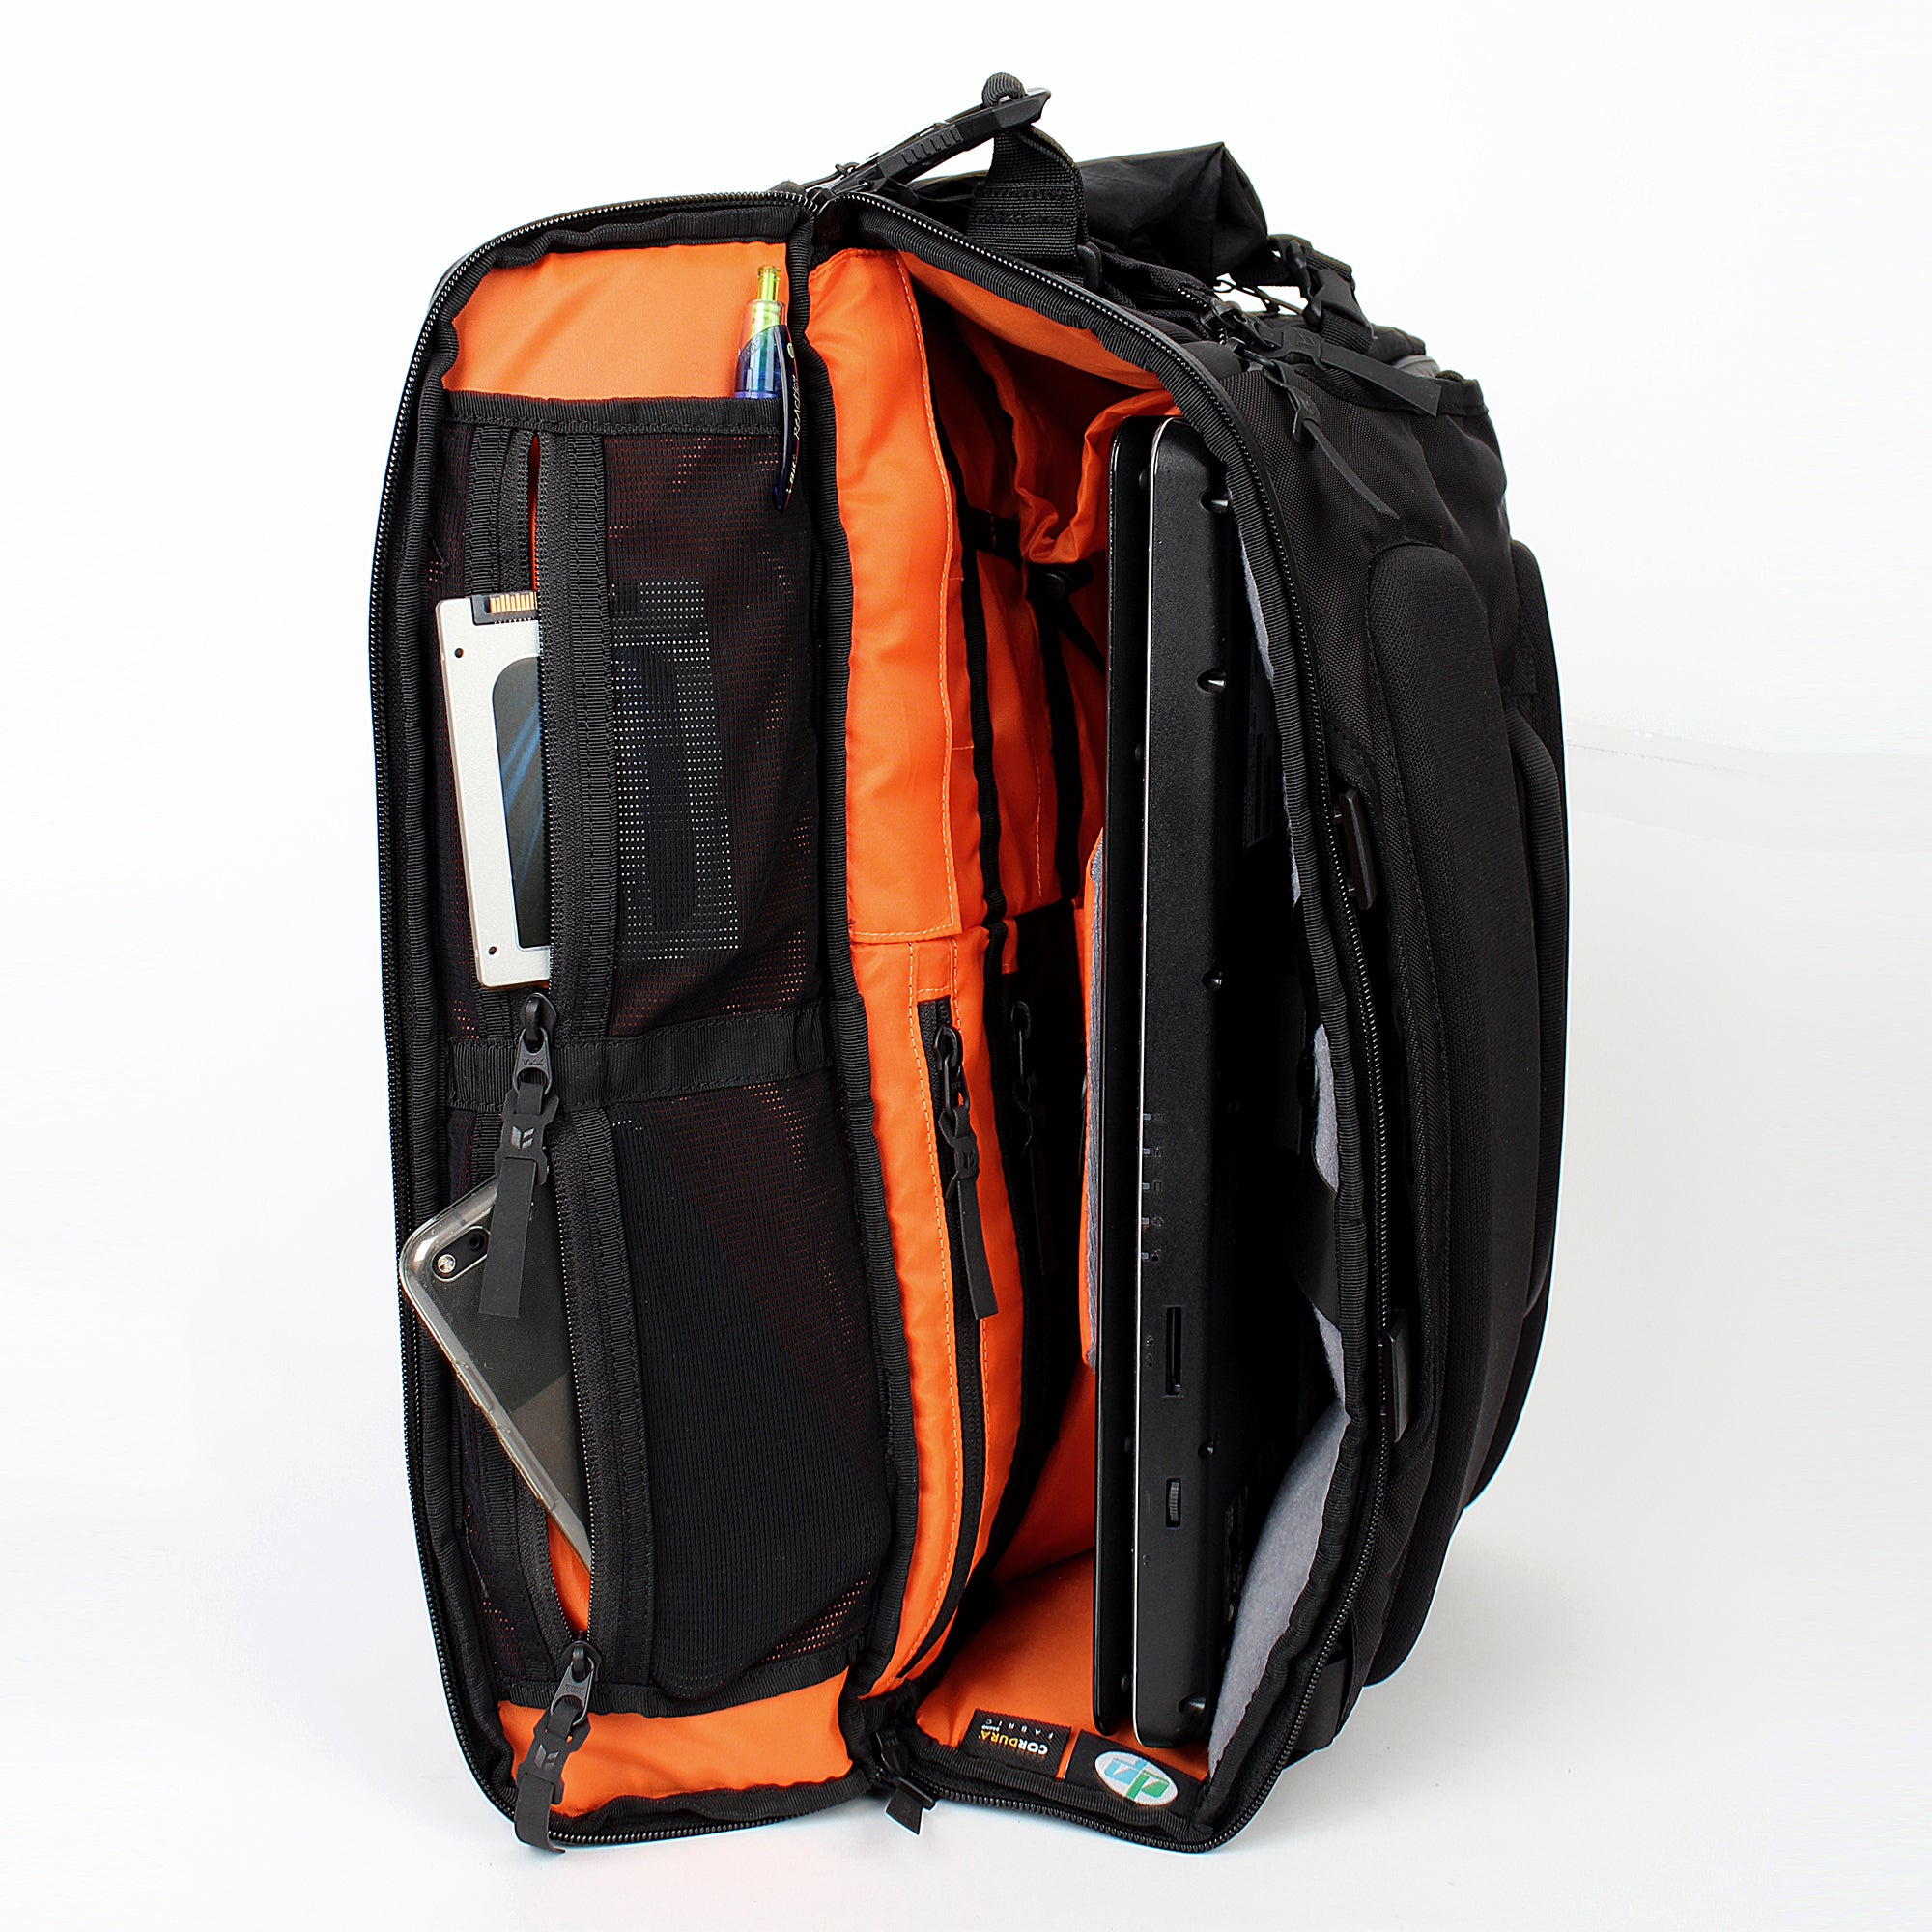 X-CASE / 3-Way Traveller Brief Pack | CODE OF BELL コードオブベル ...